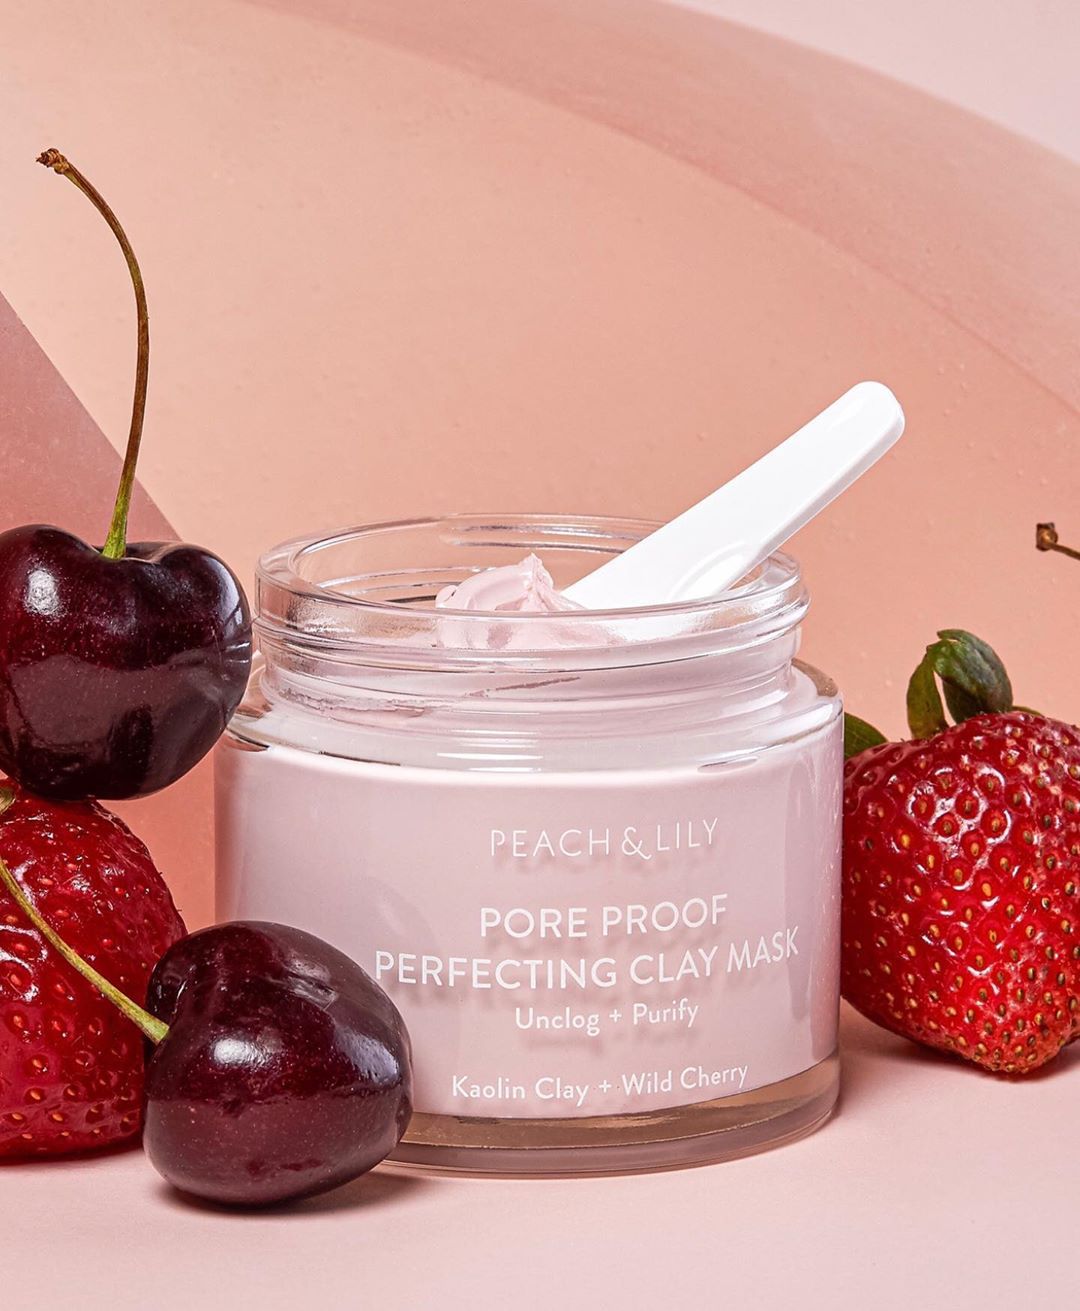 PEACH & LILY Pore Proof Perfecting Clay Mask